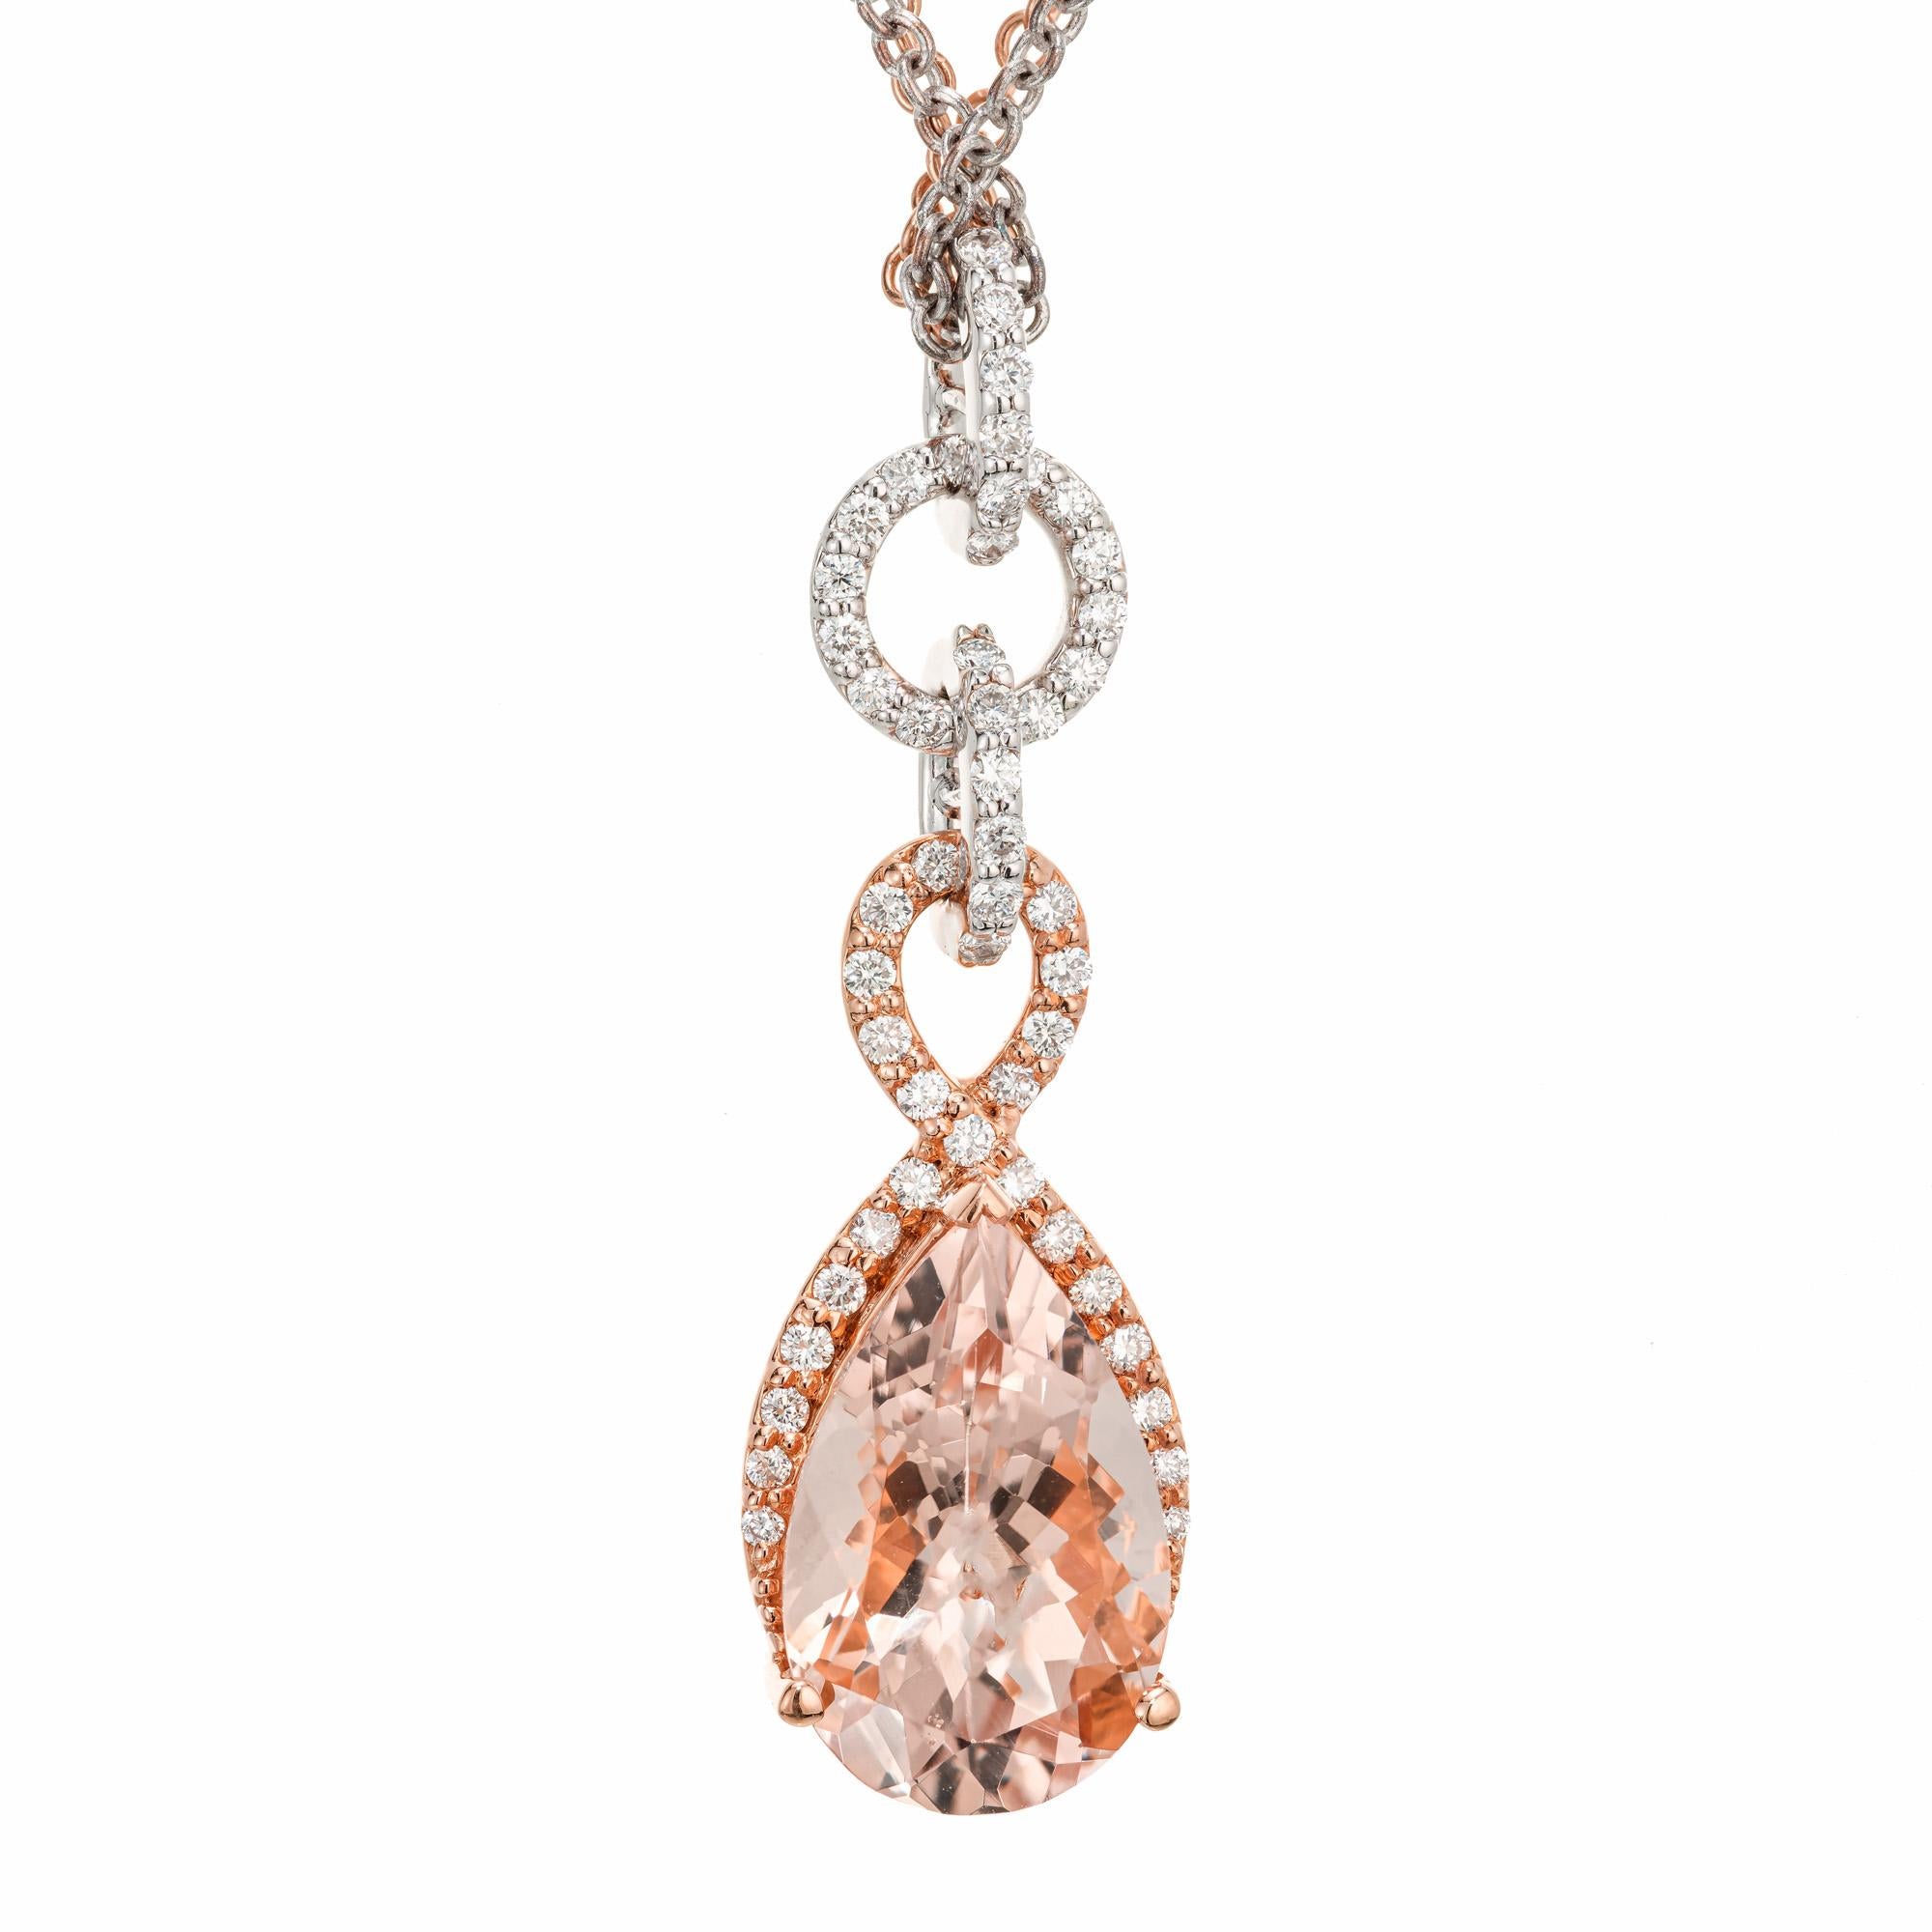 Rose and white gold diamond pendant. 1 Pear shaped morganite with a halo of round brilliant cut diamonds. The chains are 18k white and rose gold. 18 inches. 

1 par shaped morganite, approx. total weight: 4.02cts
51 round brilliant cut diamonds,